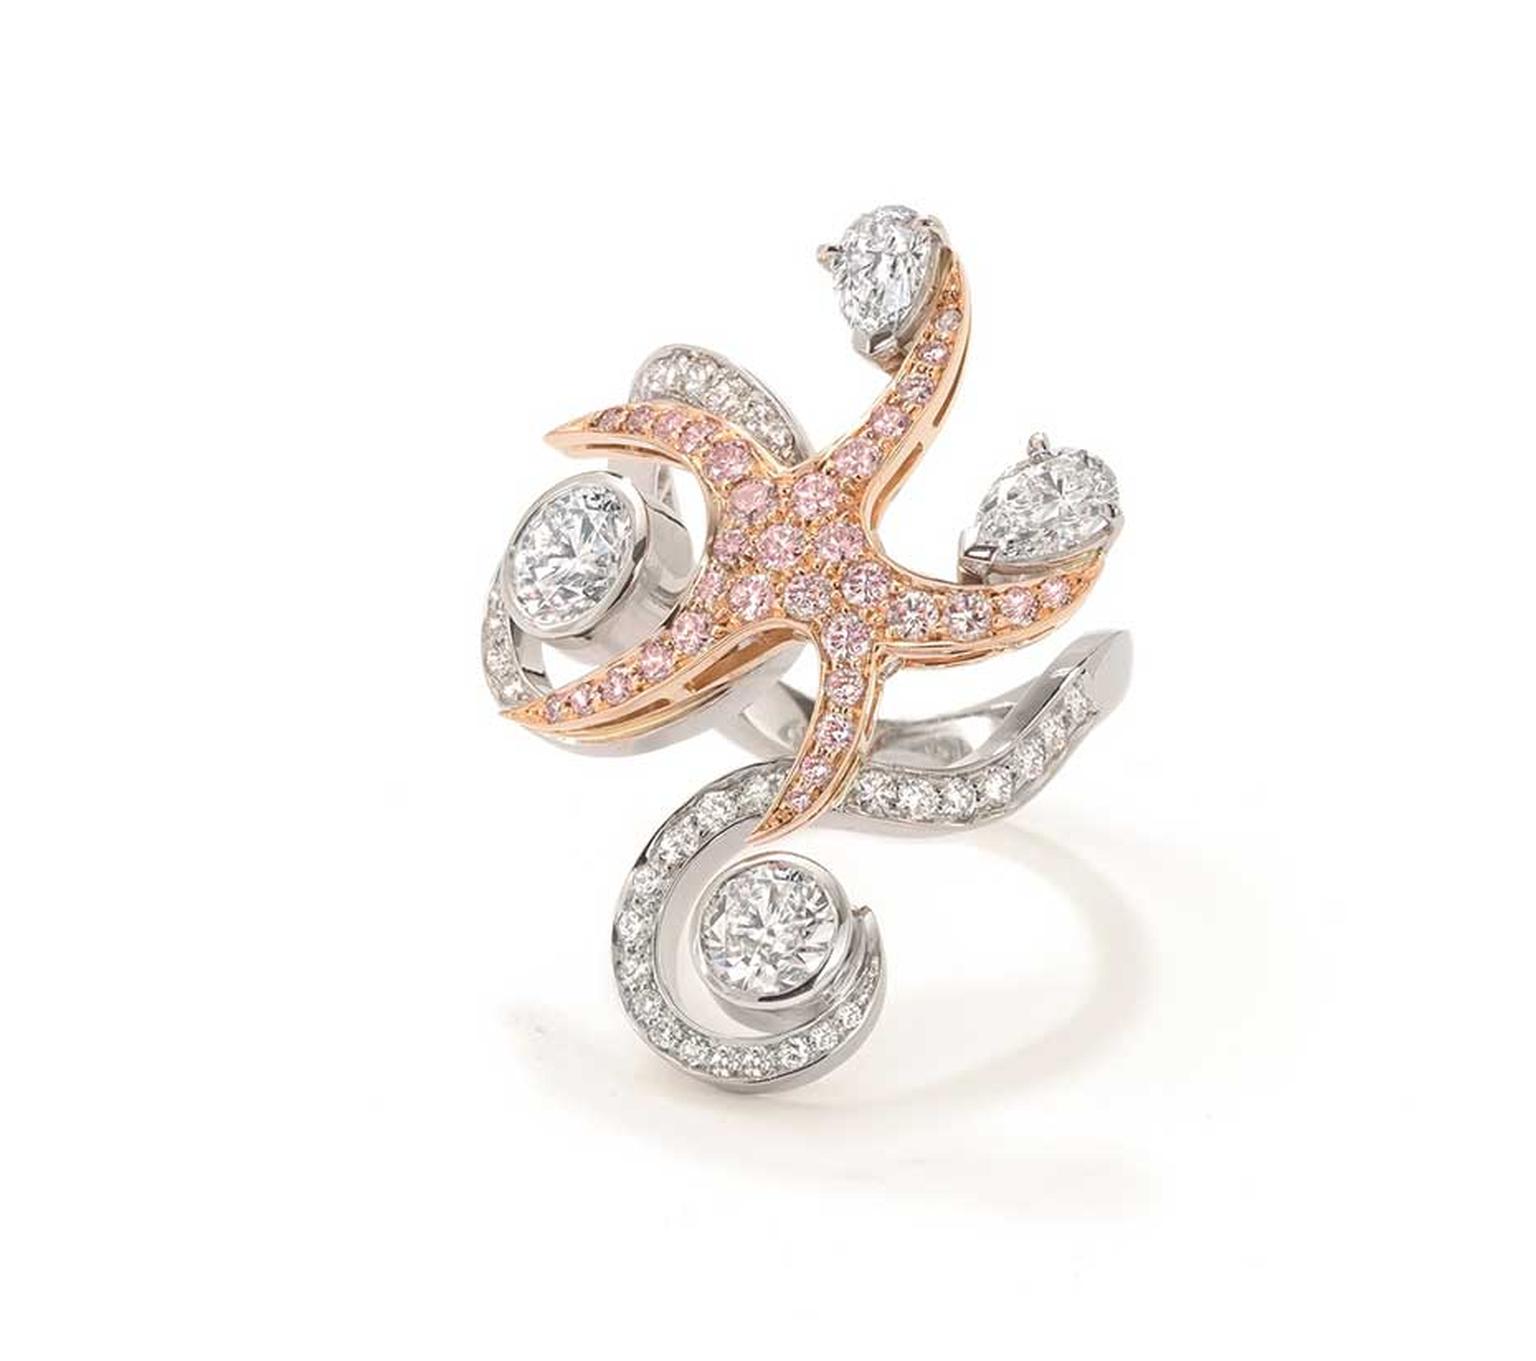 Boodles Sea Star ring with white and pink diamonds, from the new Ocean of Dreams collection.